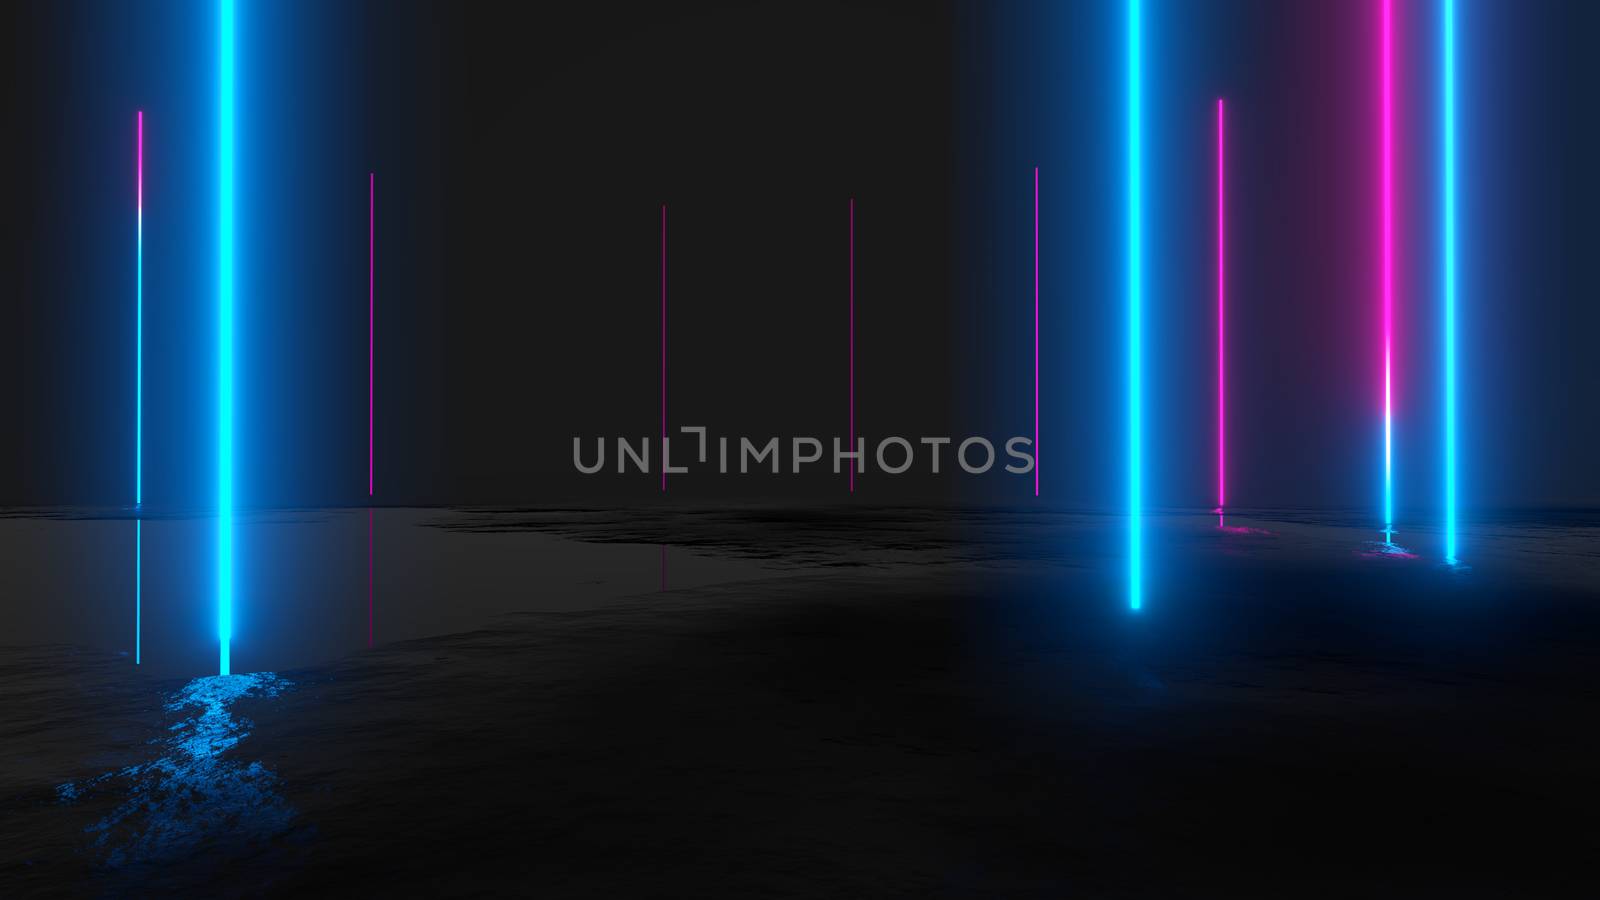 Glowing vertical neon lines, abstract background, 3D illustration